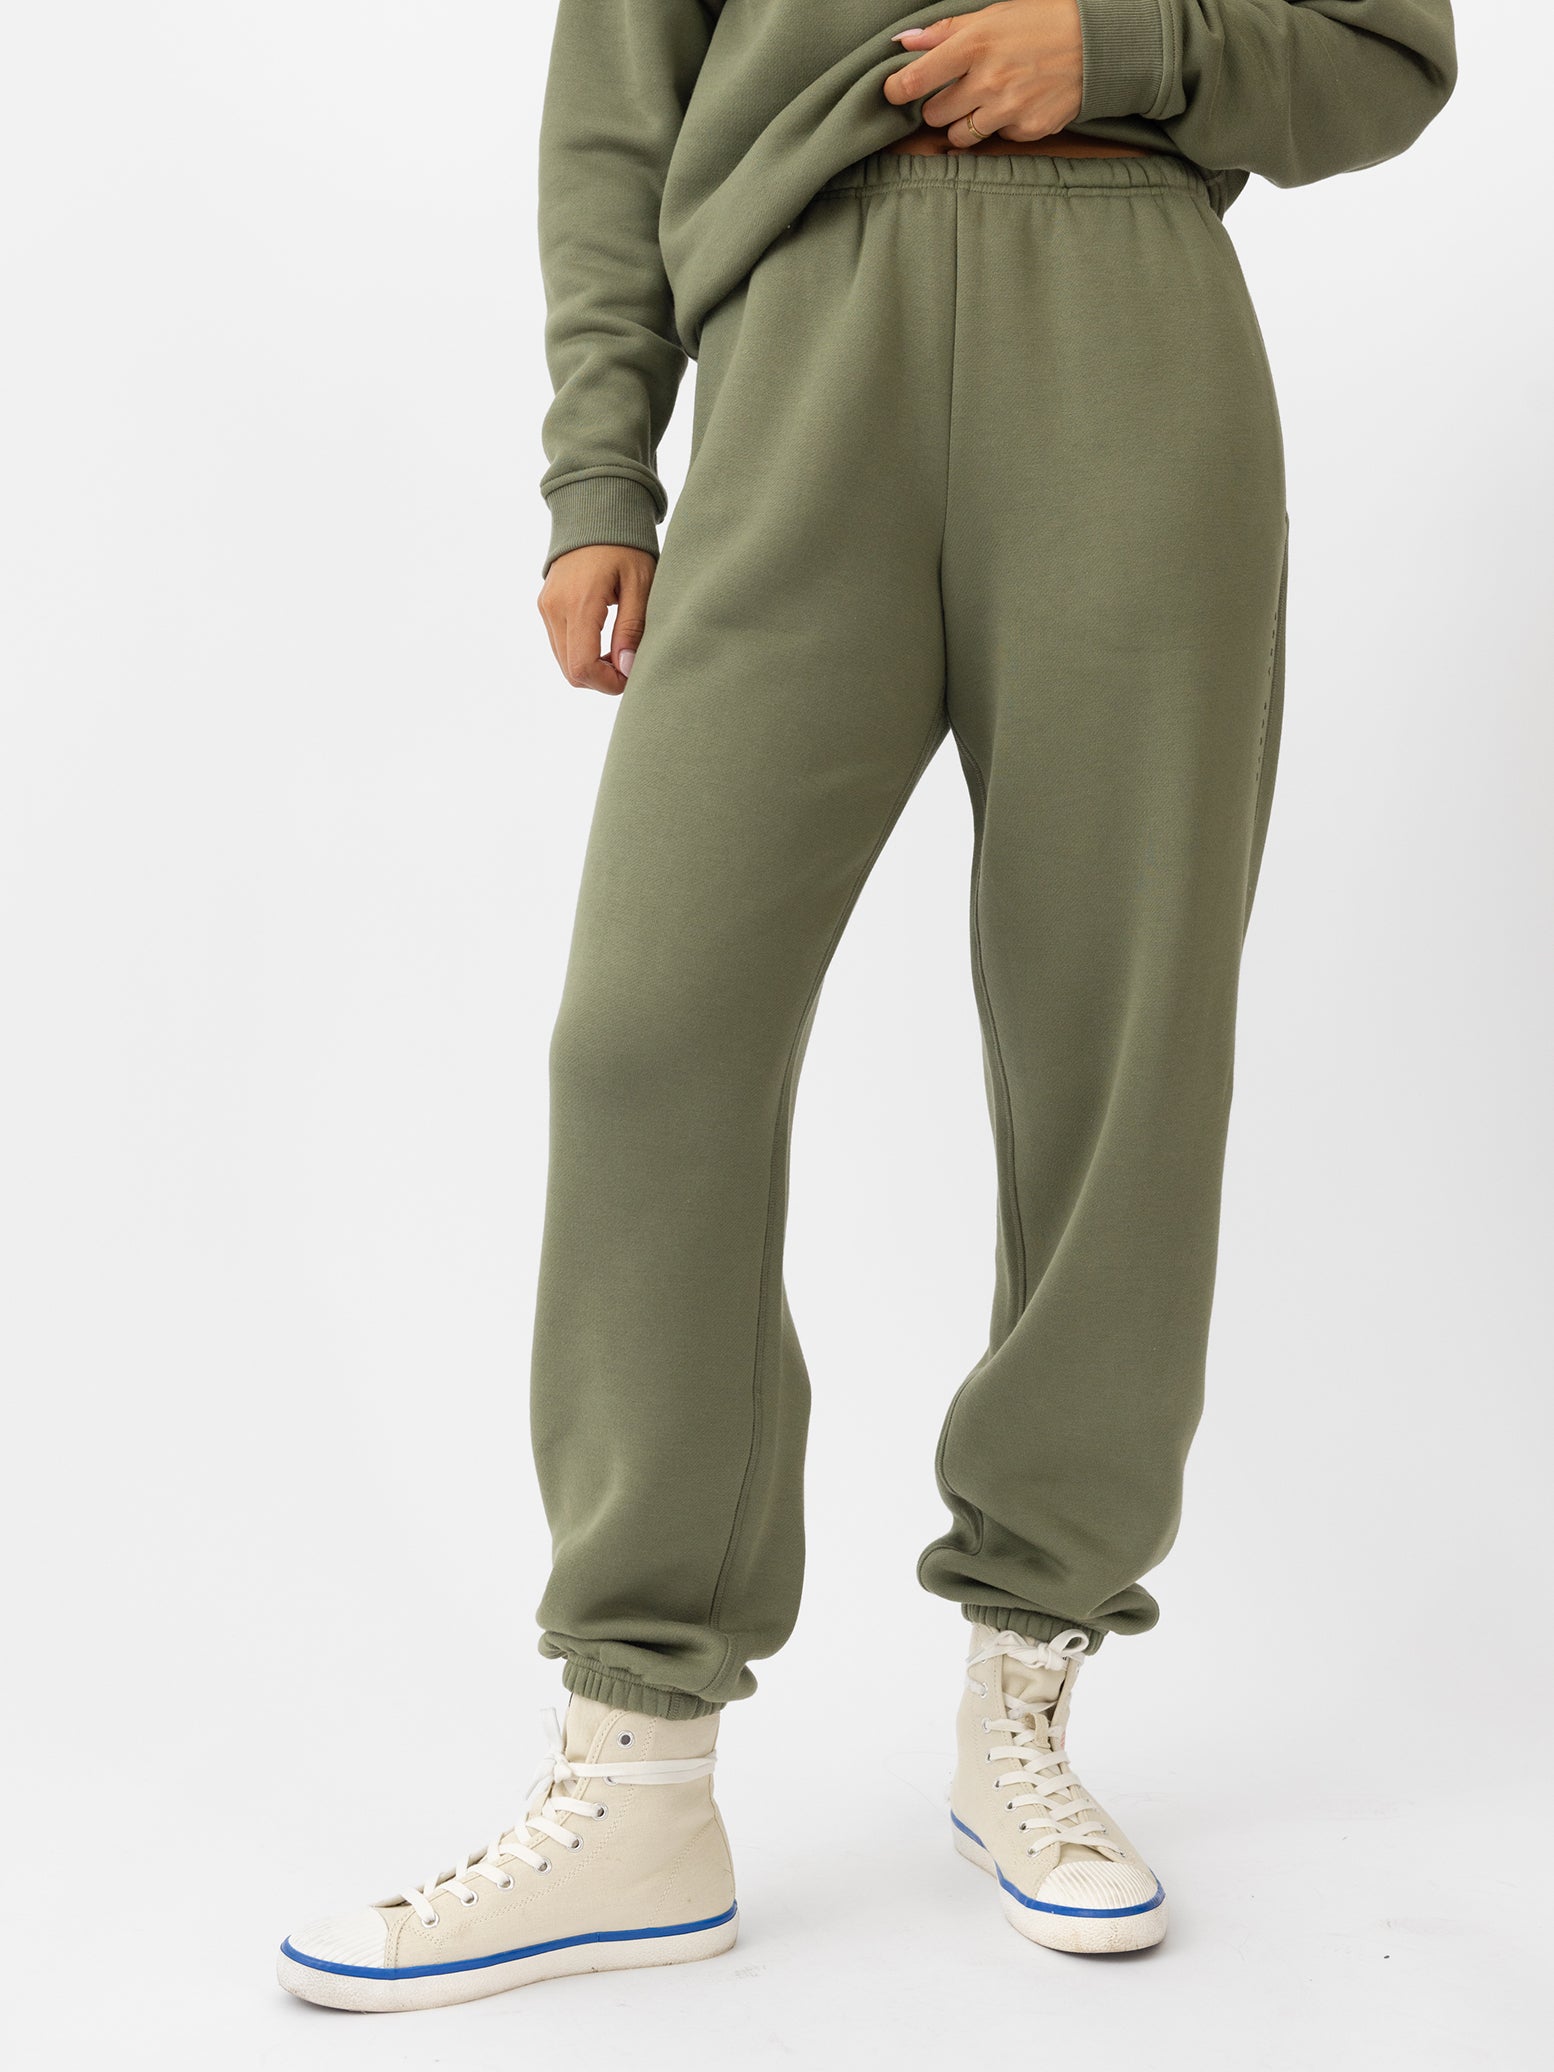 Woman wearing juniper cityscape sweats with white background 